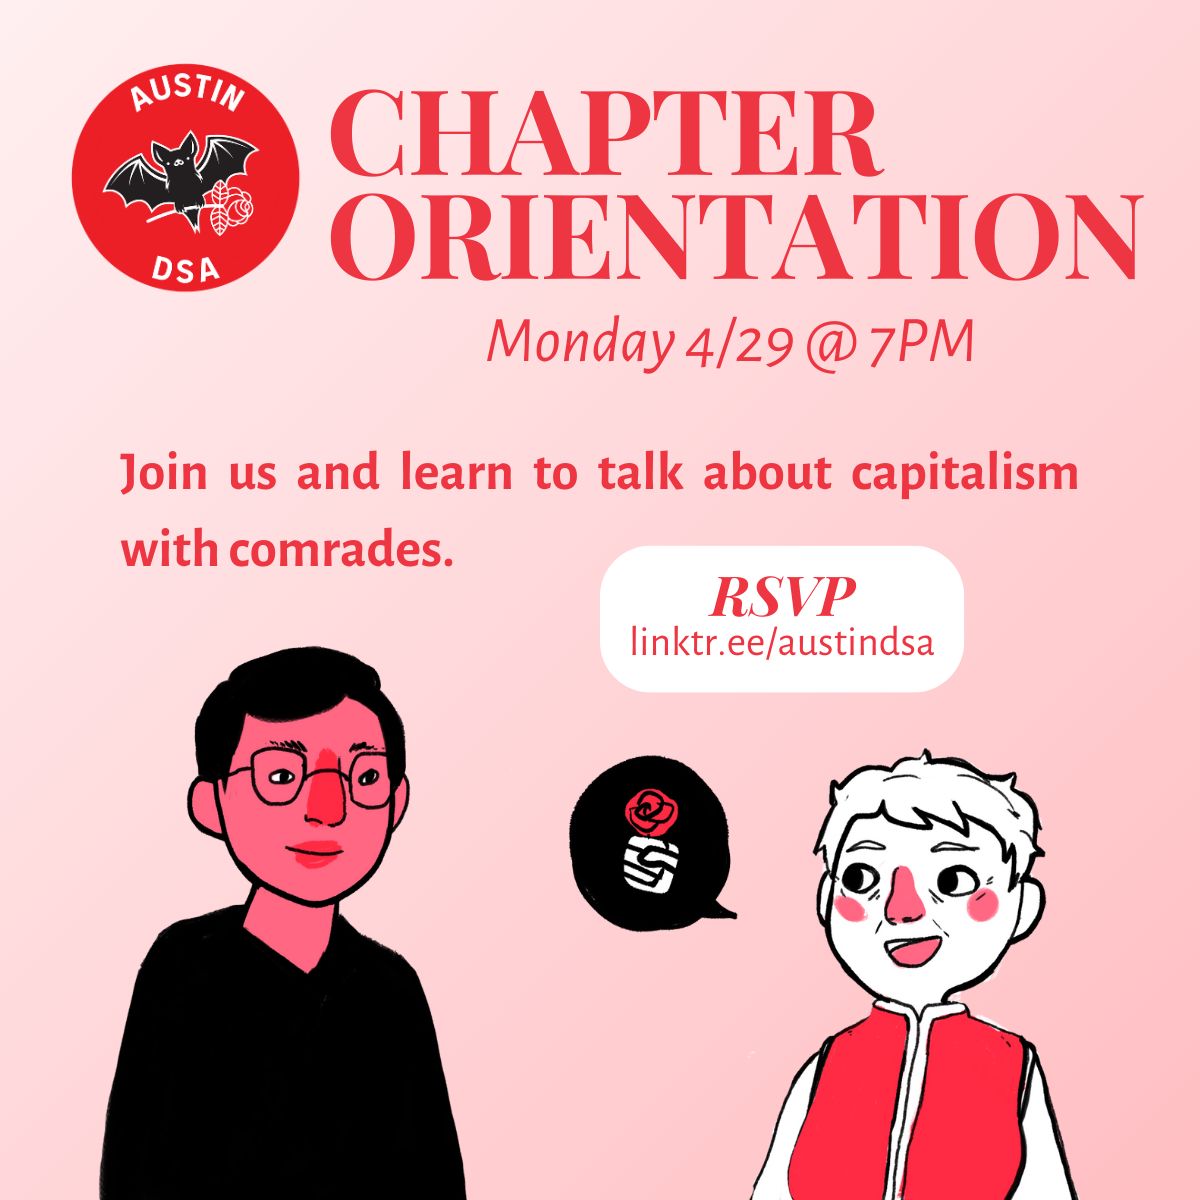 Chapter Orientation is Monday 4/29 @ 7PM! We'll provide an overview of our chapter and talk to a few committee leaders & find some simple ways to get involved. This meeting will be hybrid, so you can attend via Zoom or in-person: buff.ly/3WguOR2